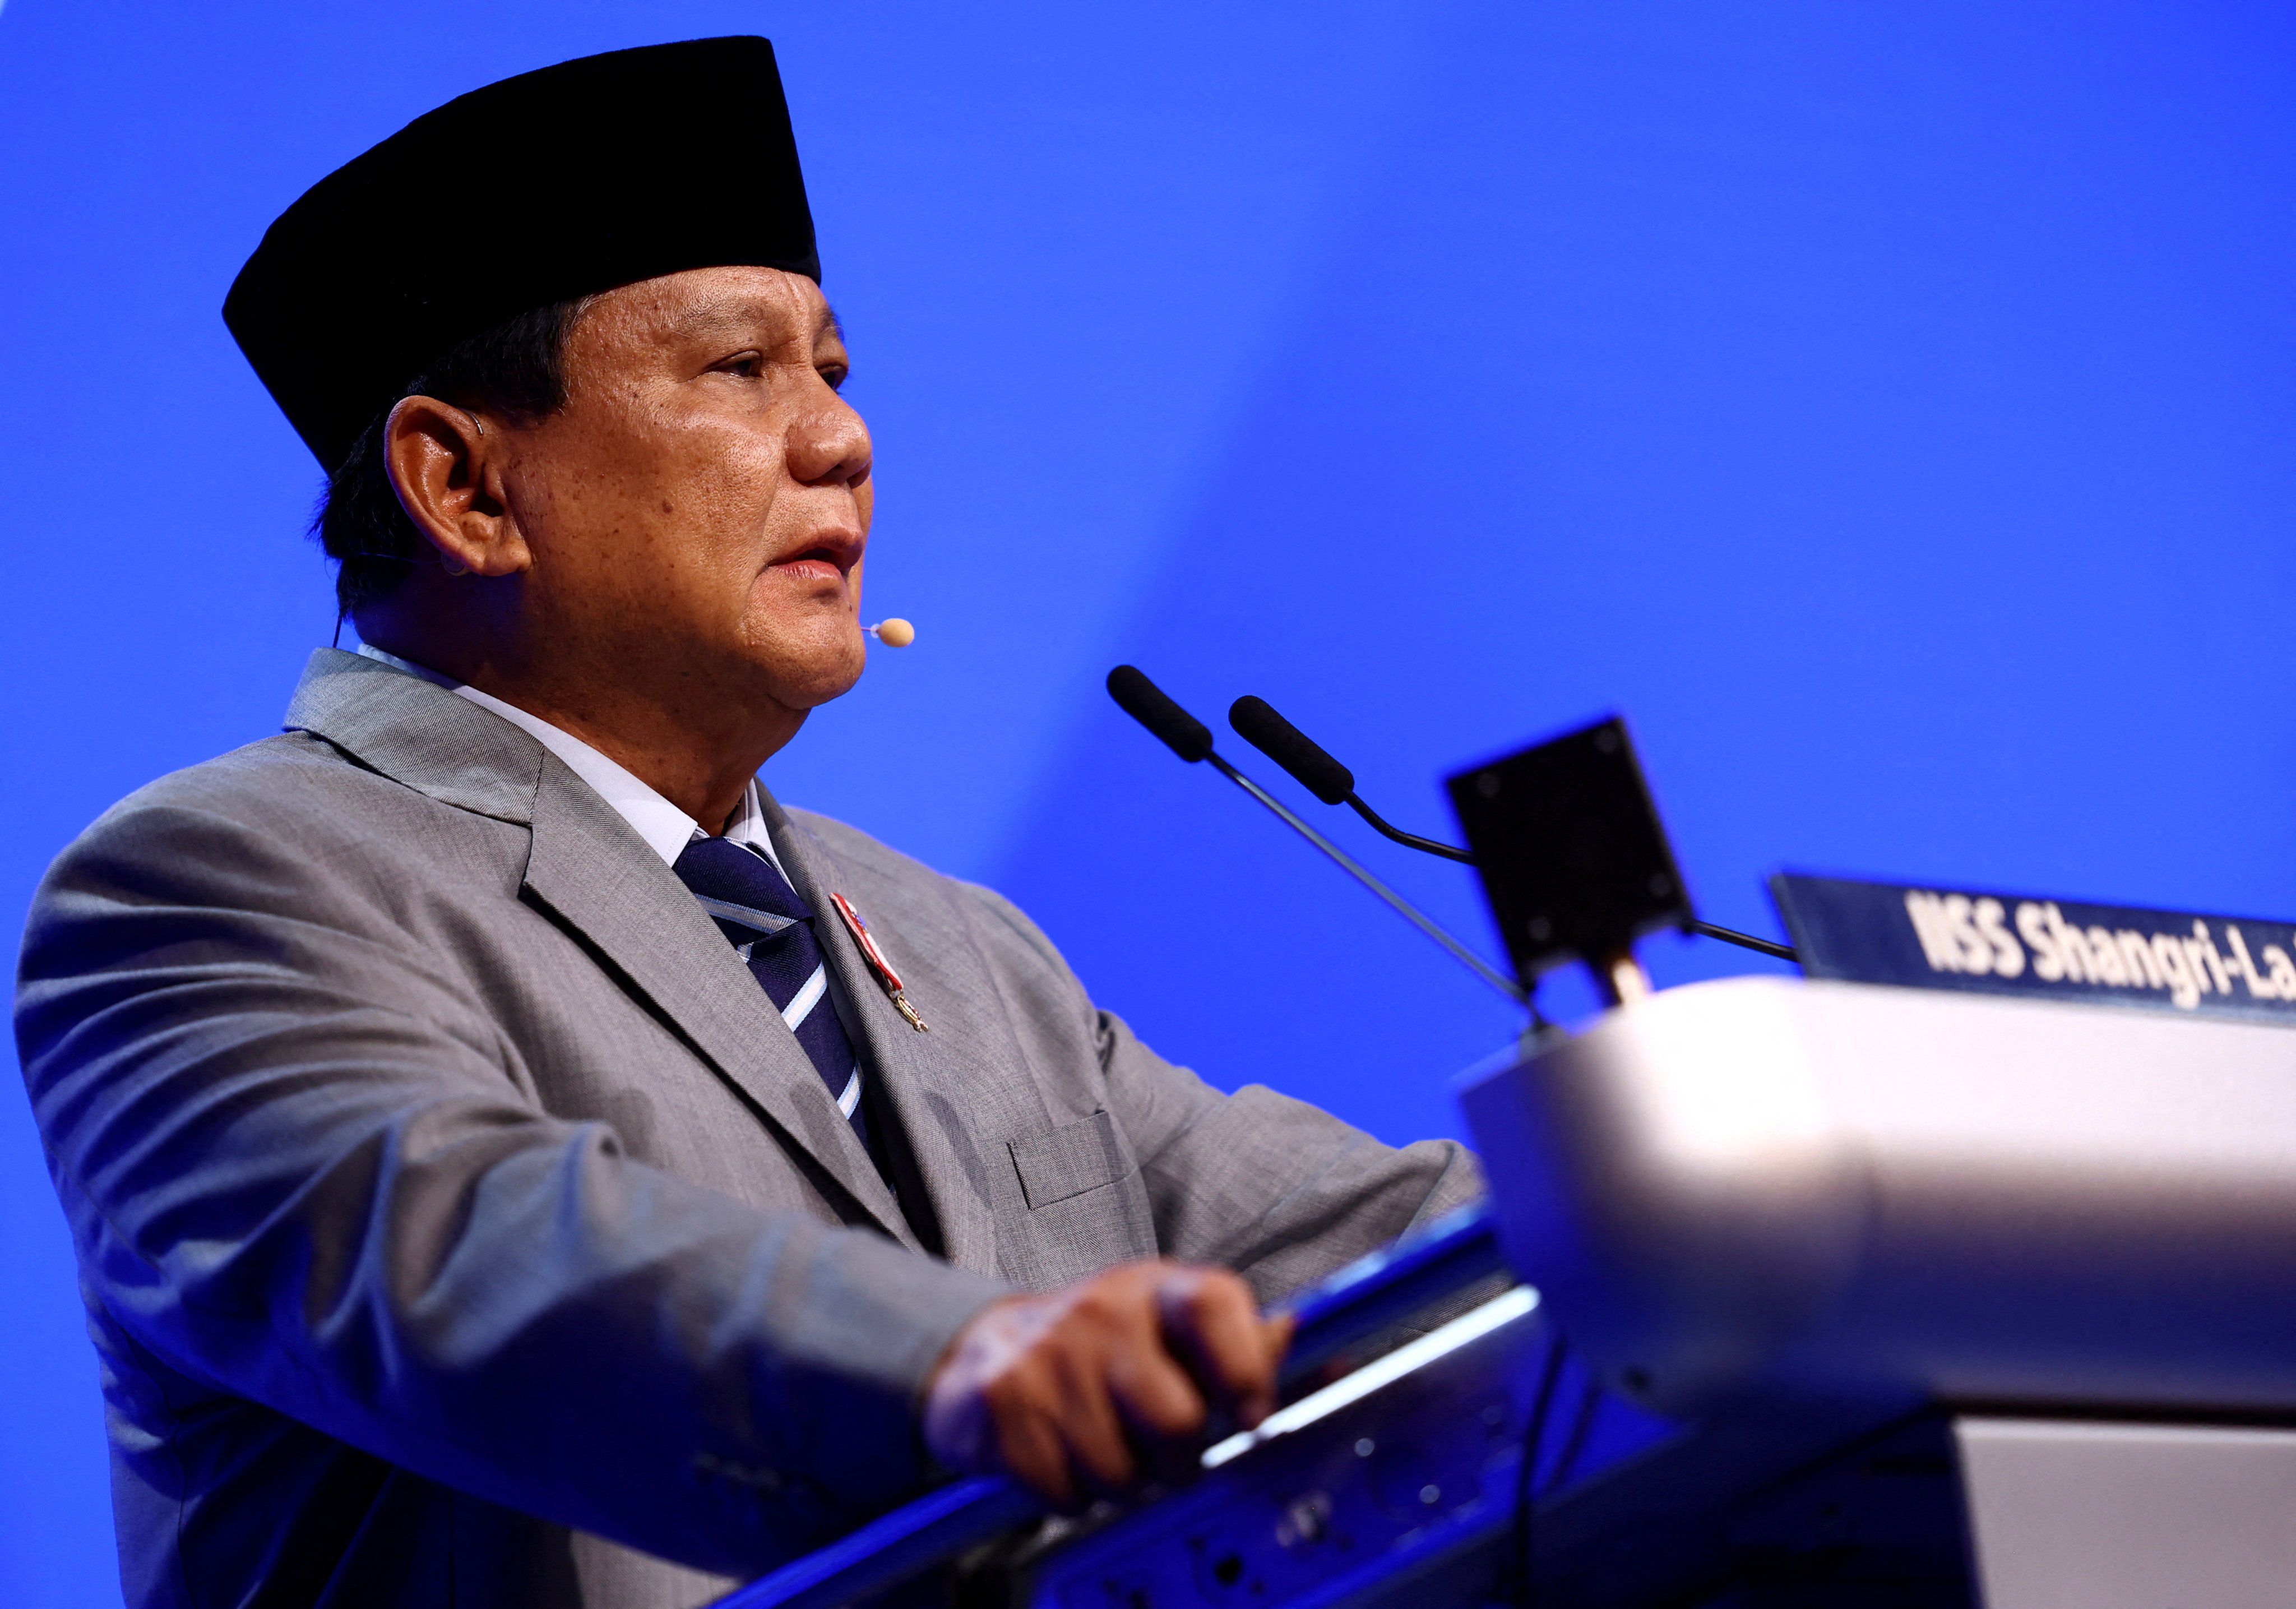 Indonesia’s President-elect Prabowo Subianto speaks at the Shangri-La Dialogue in Singapore in June. Photo: Reuters